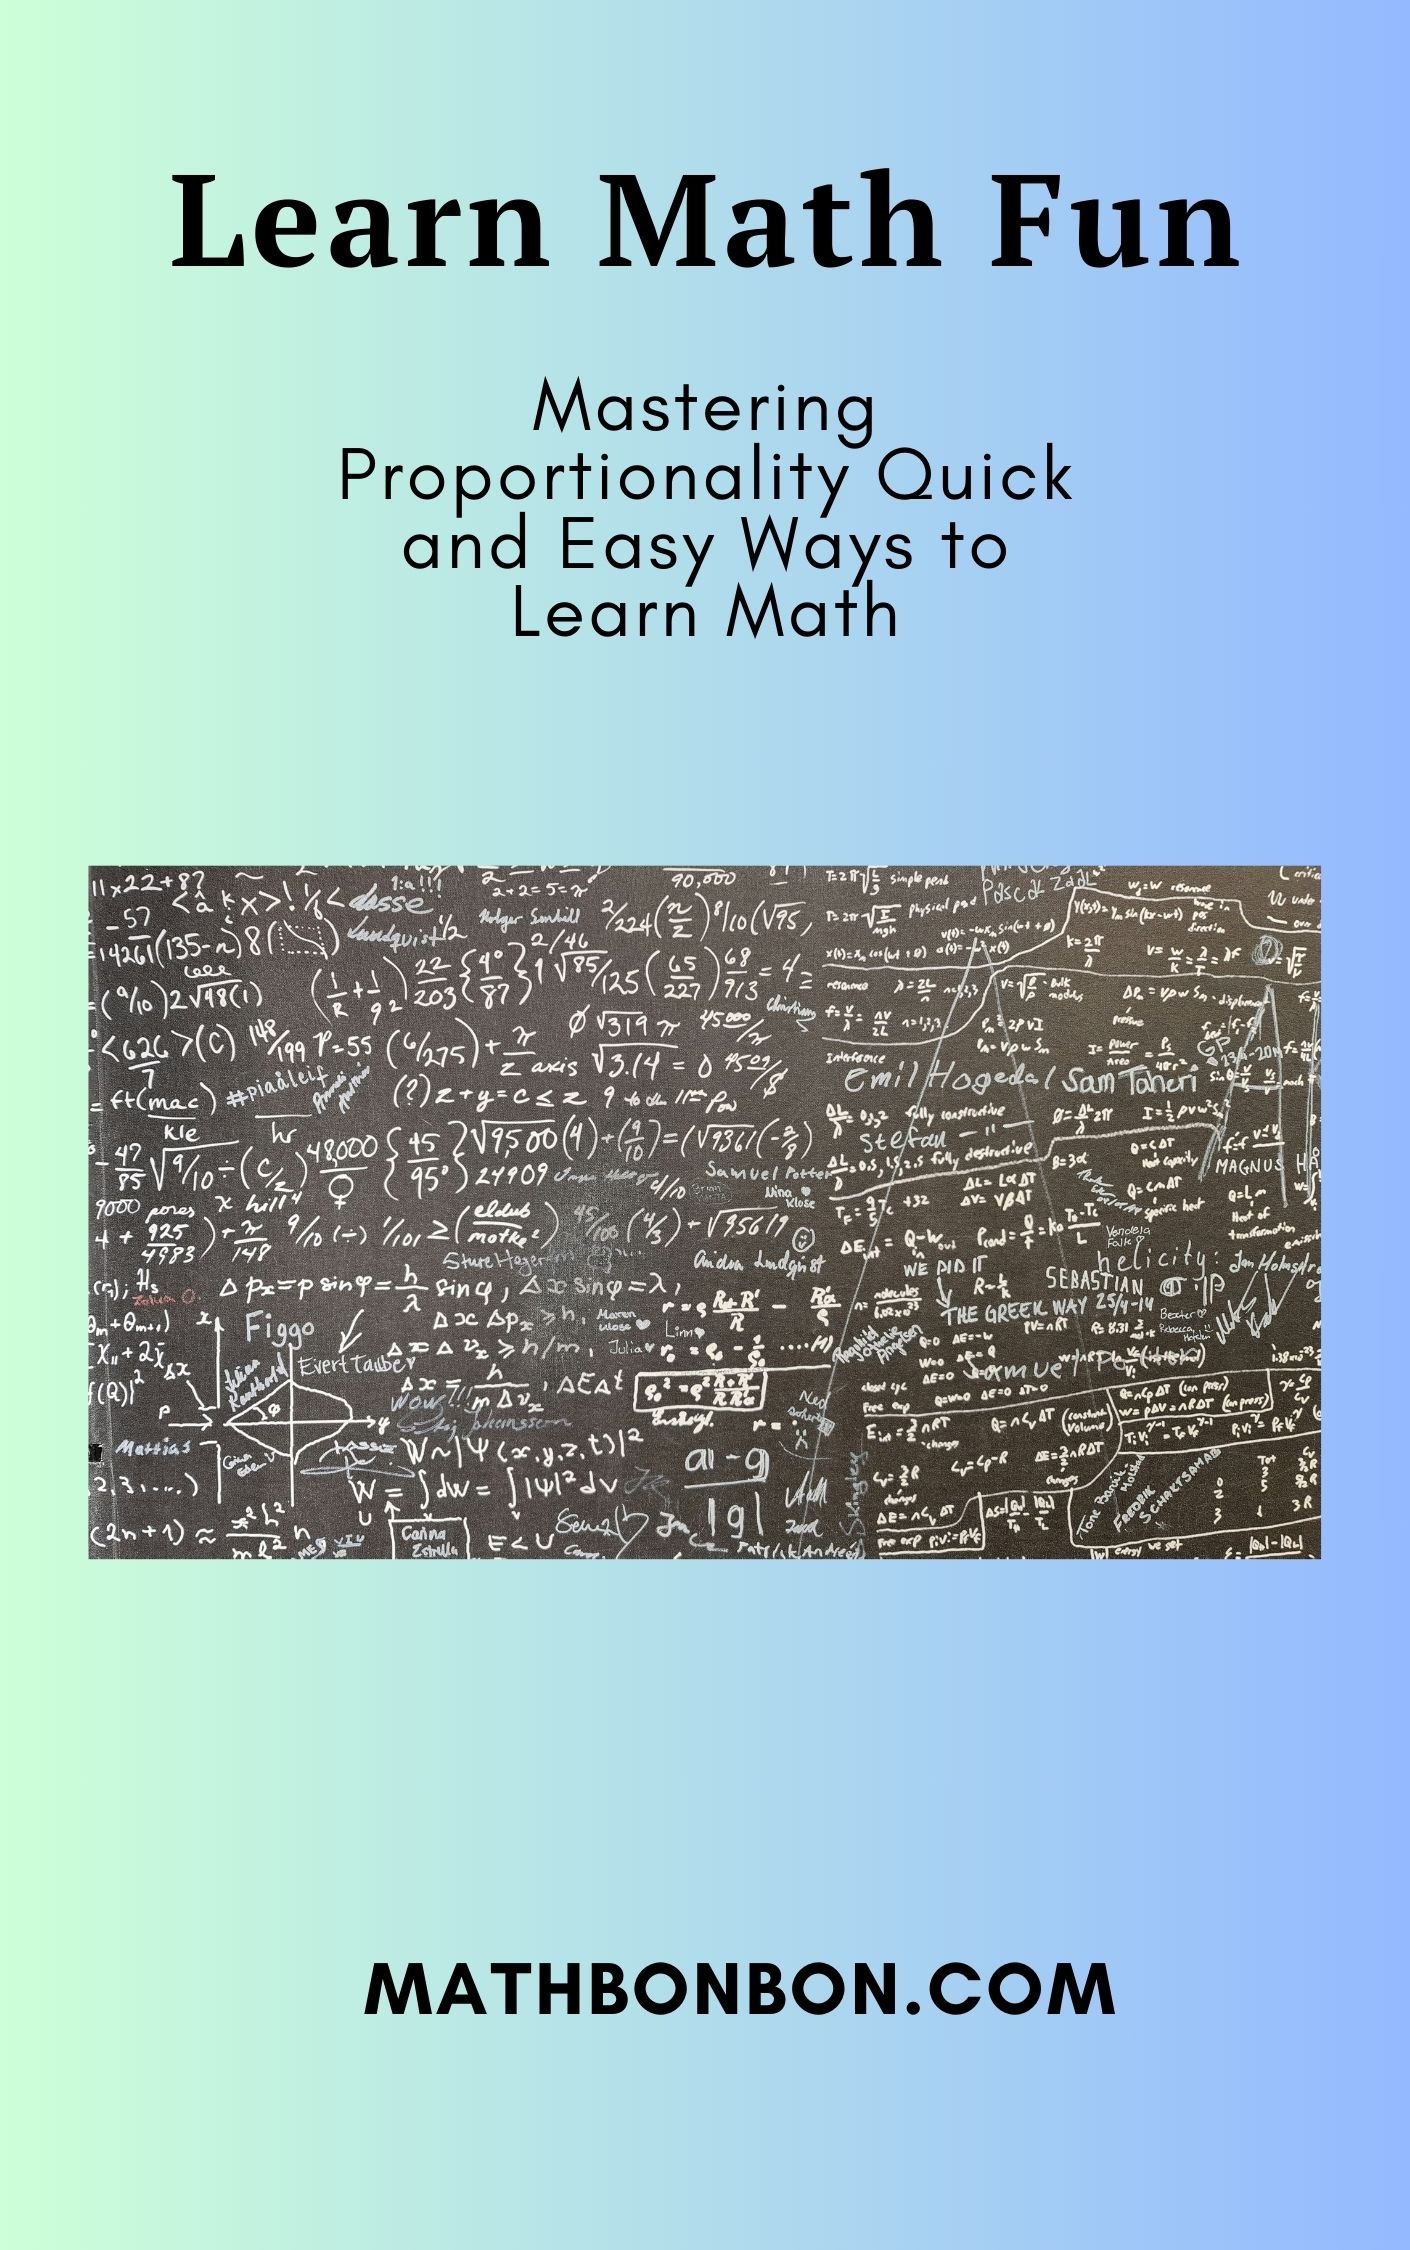 cool math art Mastering Proportionality Quick and Easy Ways to Learn Math